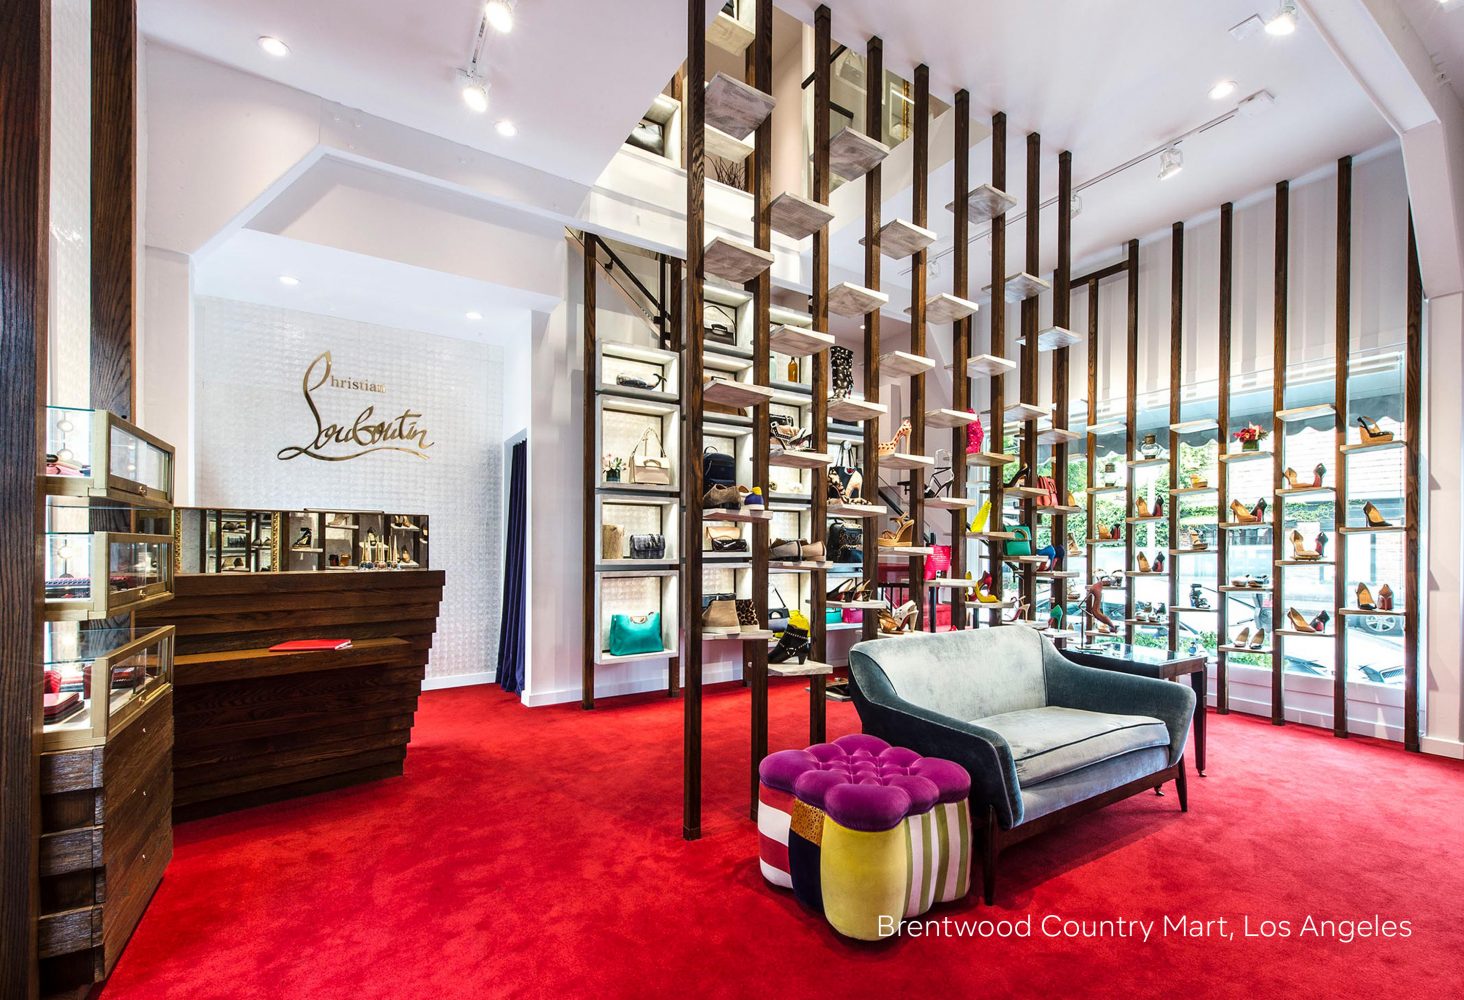 Christian Louboutin Flagship in Brentwood, LA, Global Flagship Design, designed by Household.